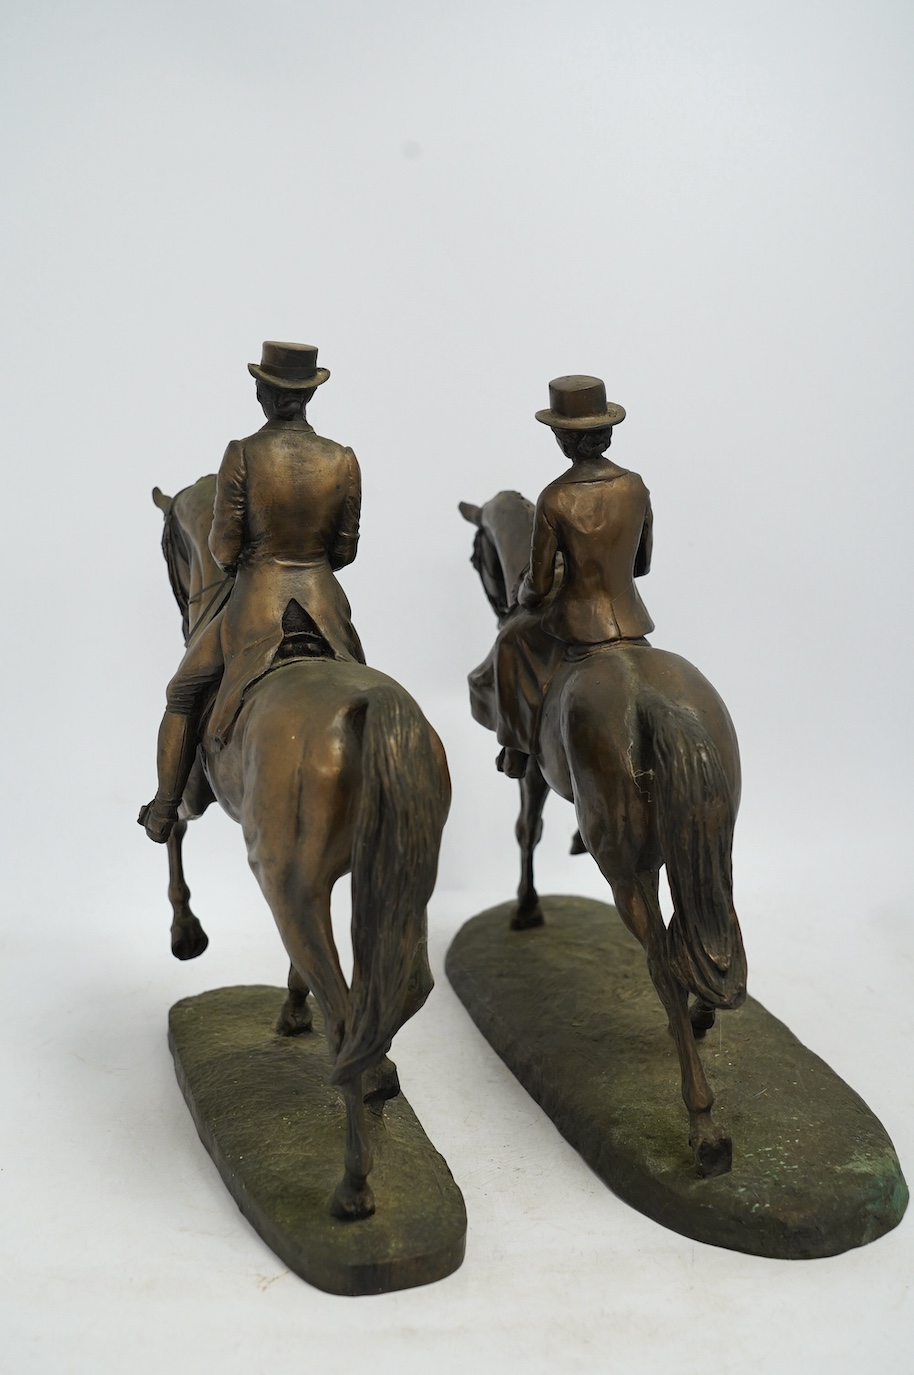 Harriet Glen and David Crenty, two cold cast resin bronze equestrian groups, 32cm wide. Condition - good